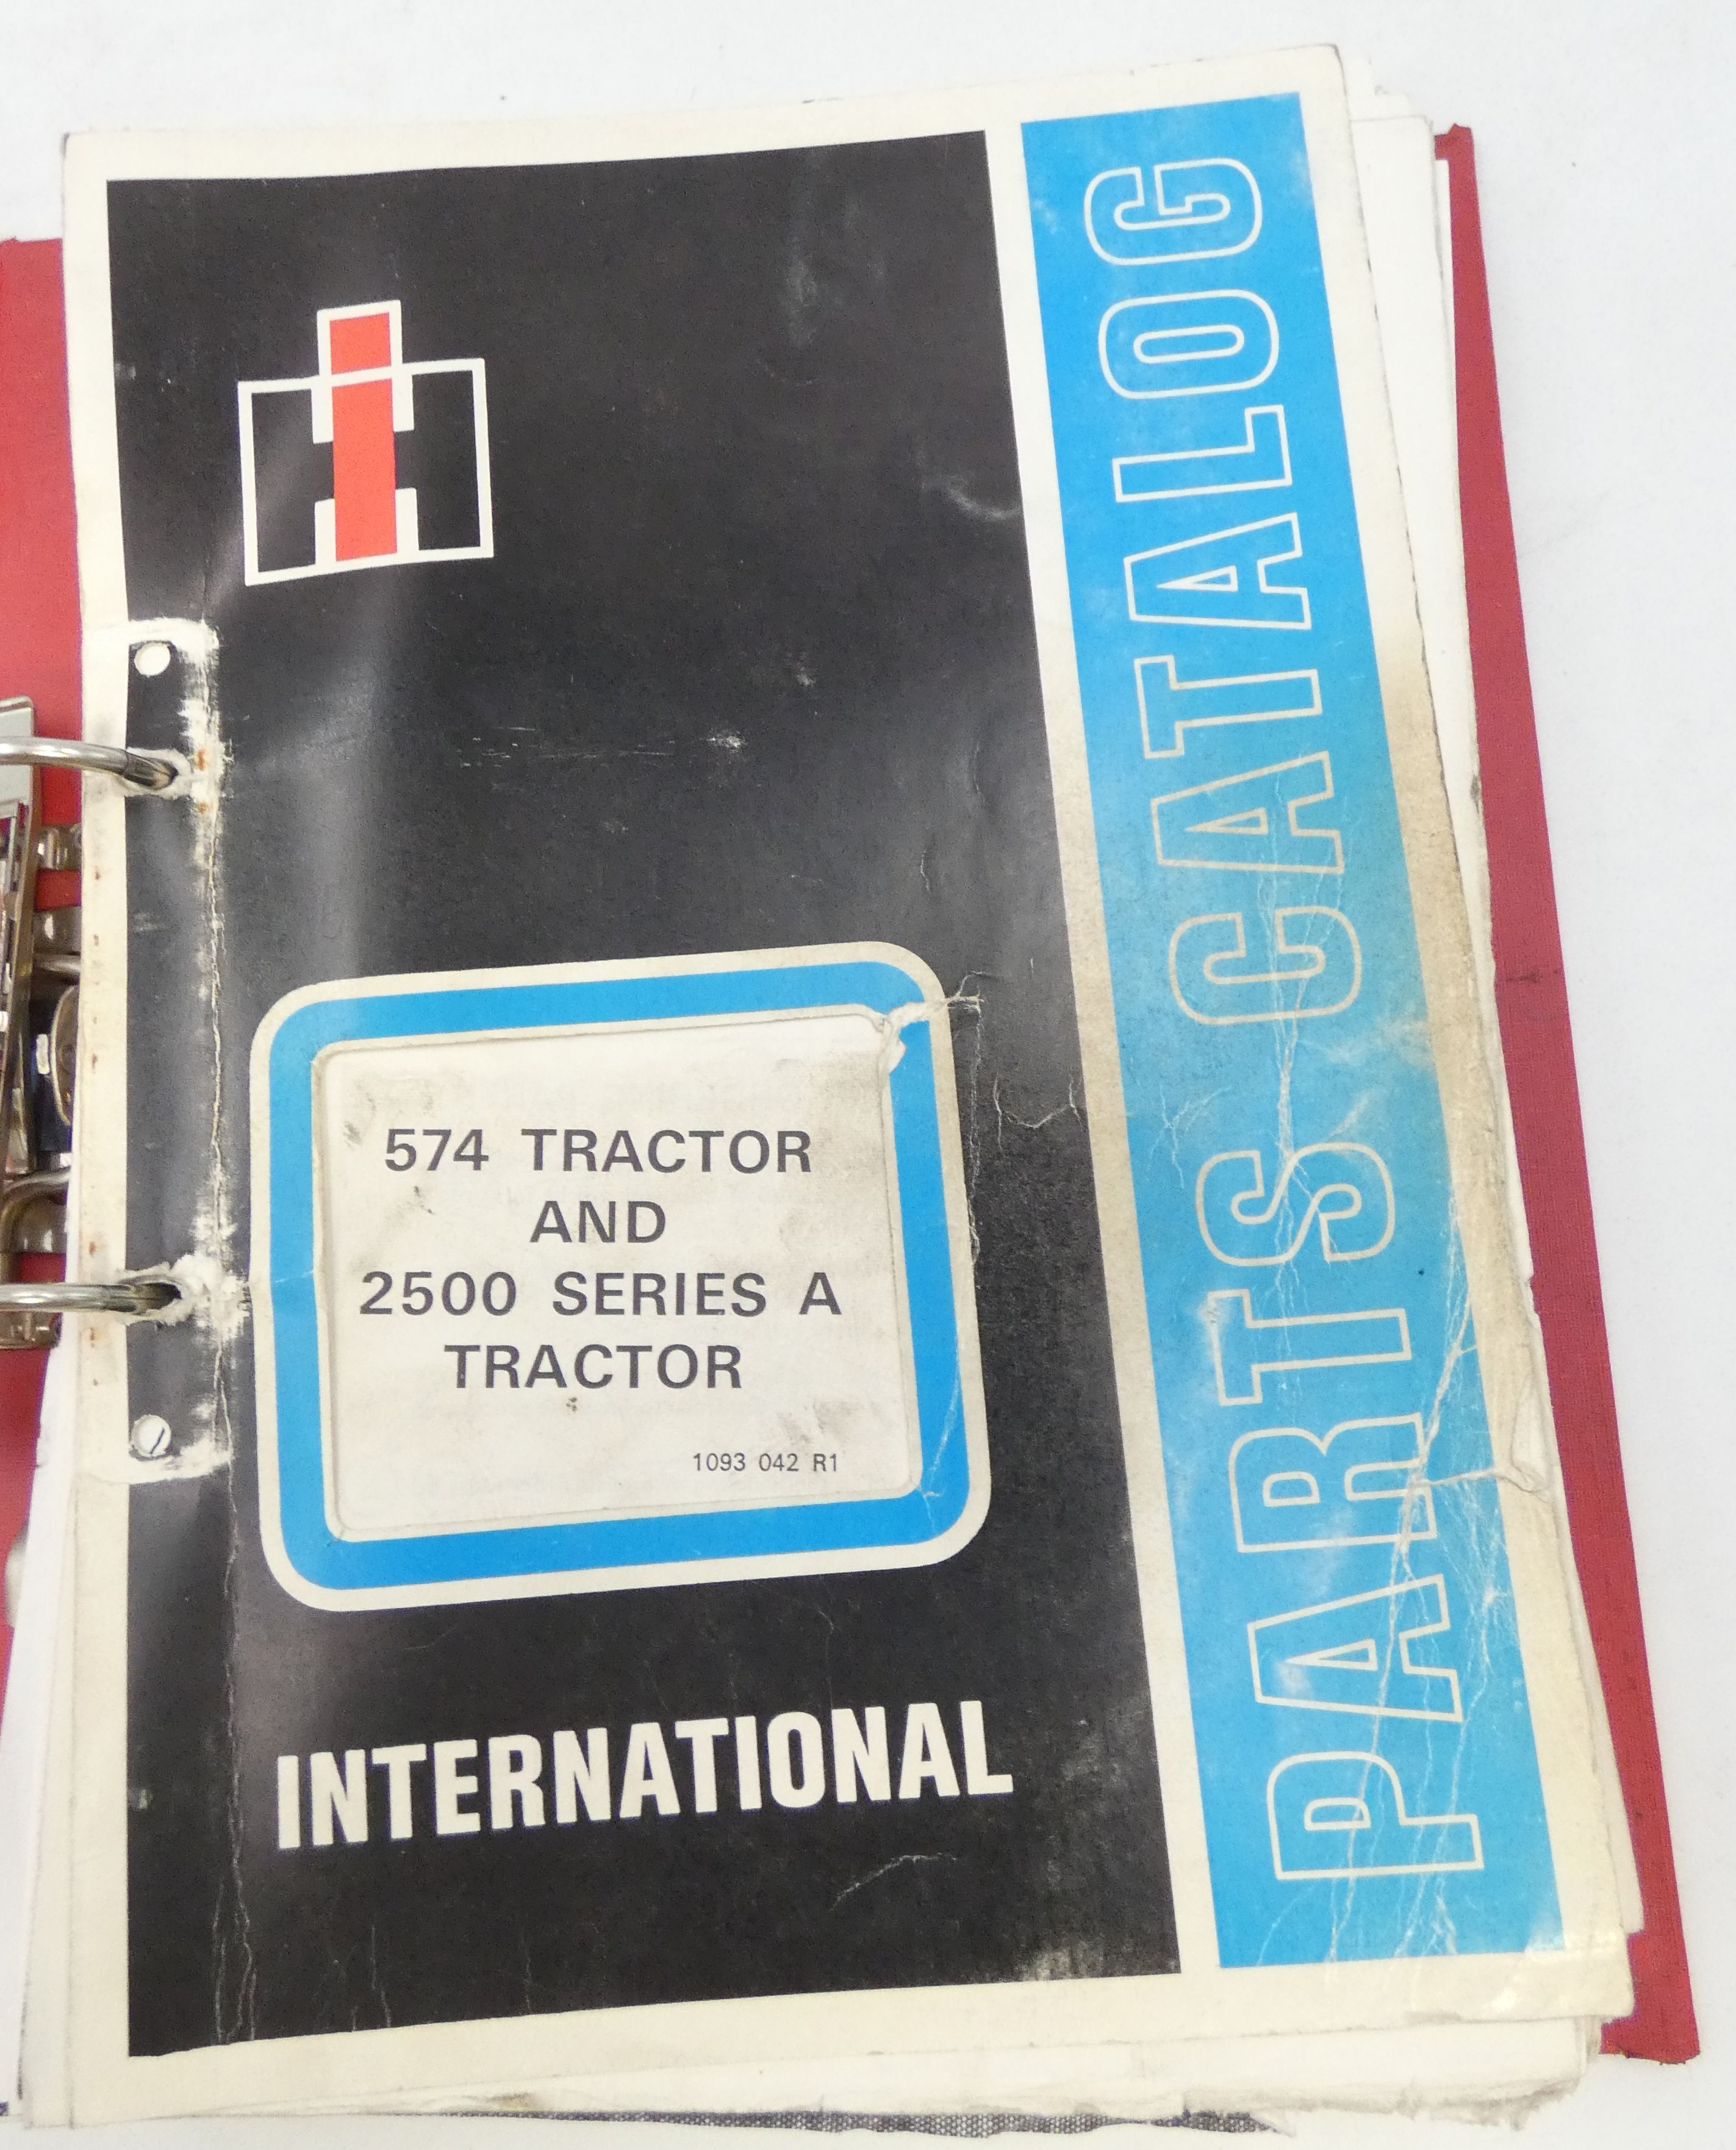 International 574 tractor and 2500 series A tractor parts catalog